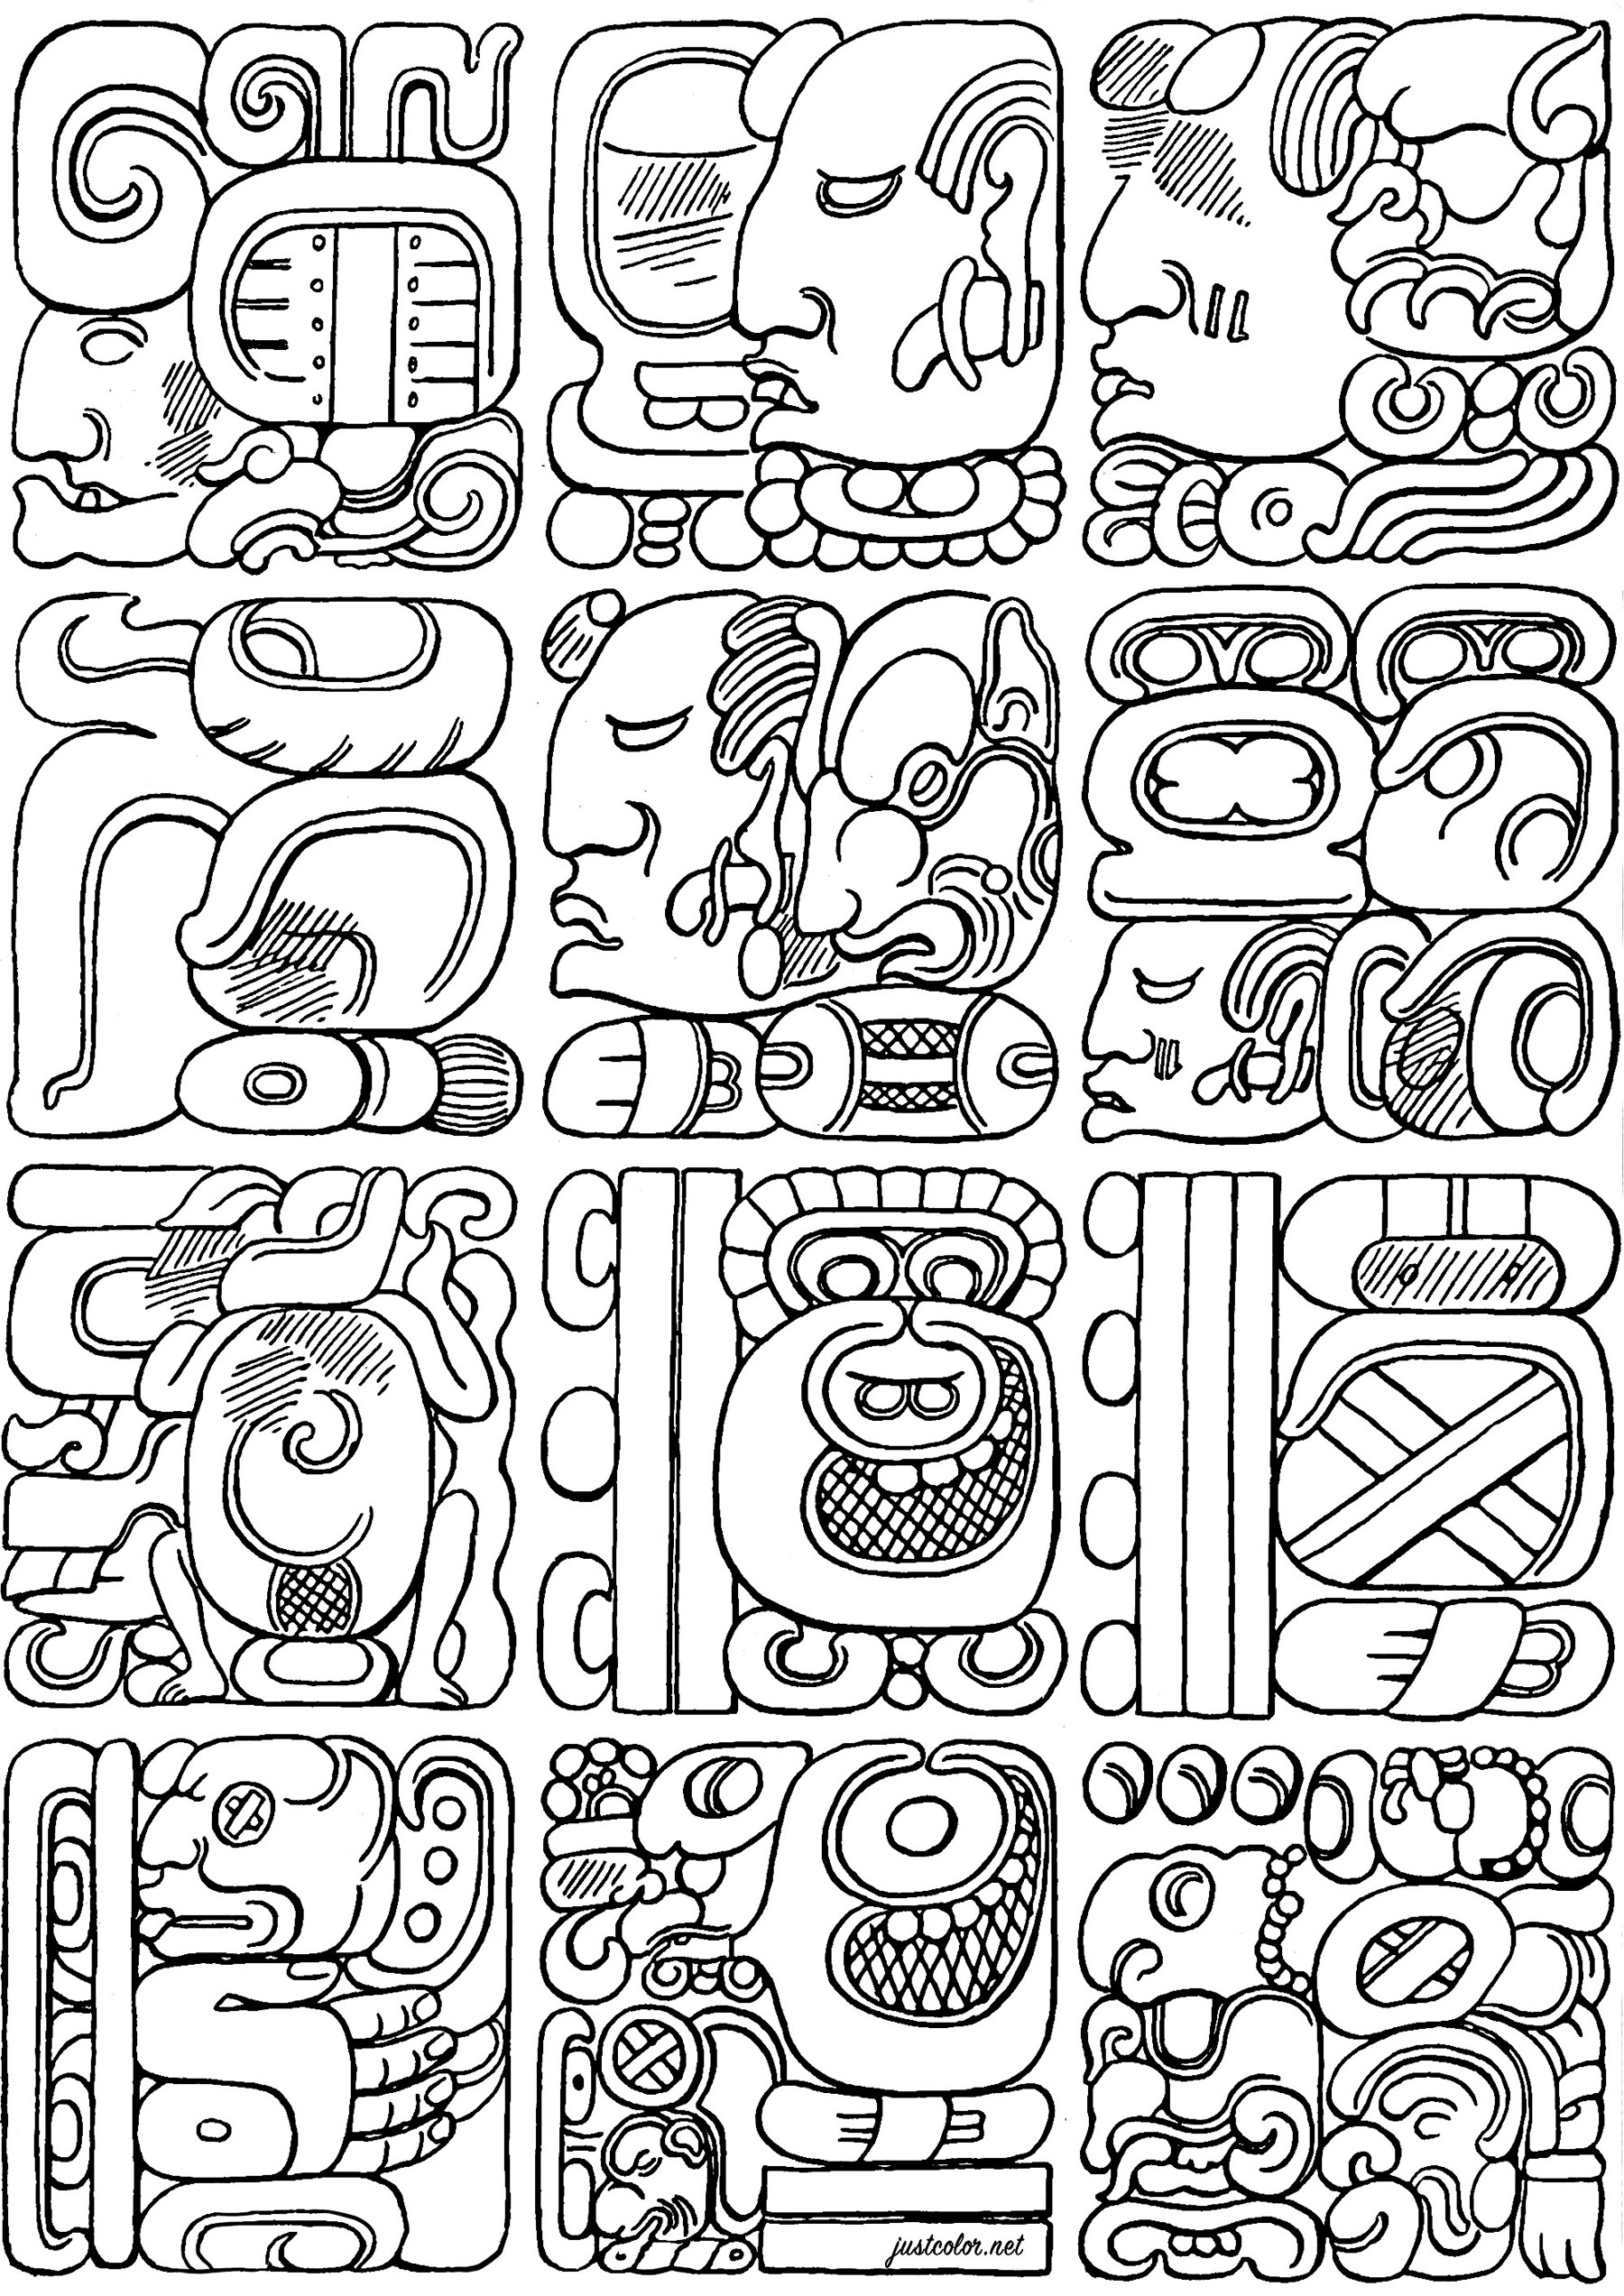 Coloring created from authentic Mayan glyphs. Mayan glyphs are one of the few fully-developed writing systems in the pre-Columbian Americas, allowing Mayan languages to be transcribed with near-perfect precision.Through their complex glyphic inscriptions, the Maya recorded historical events, myths, mathematics and astronomical observations that continue to fascinate researchers today.